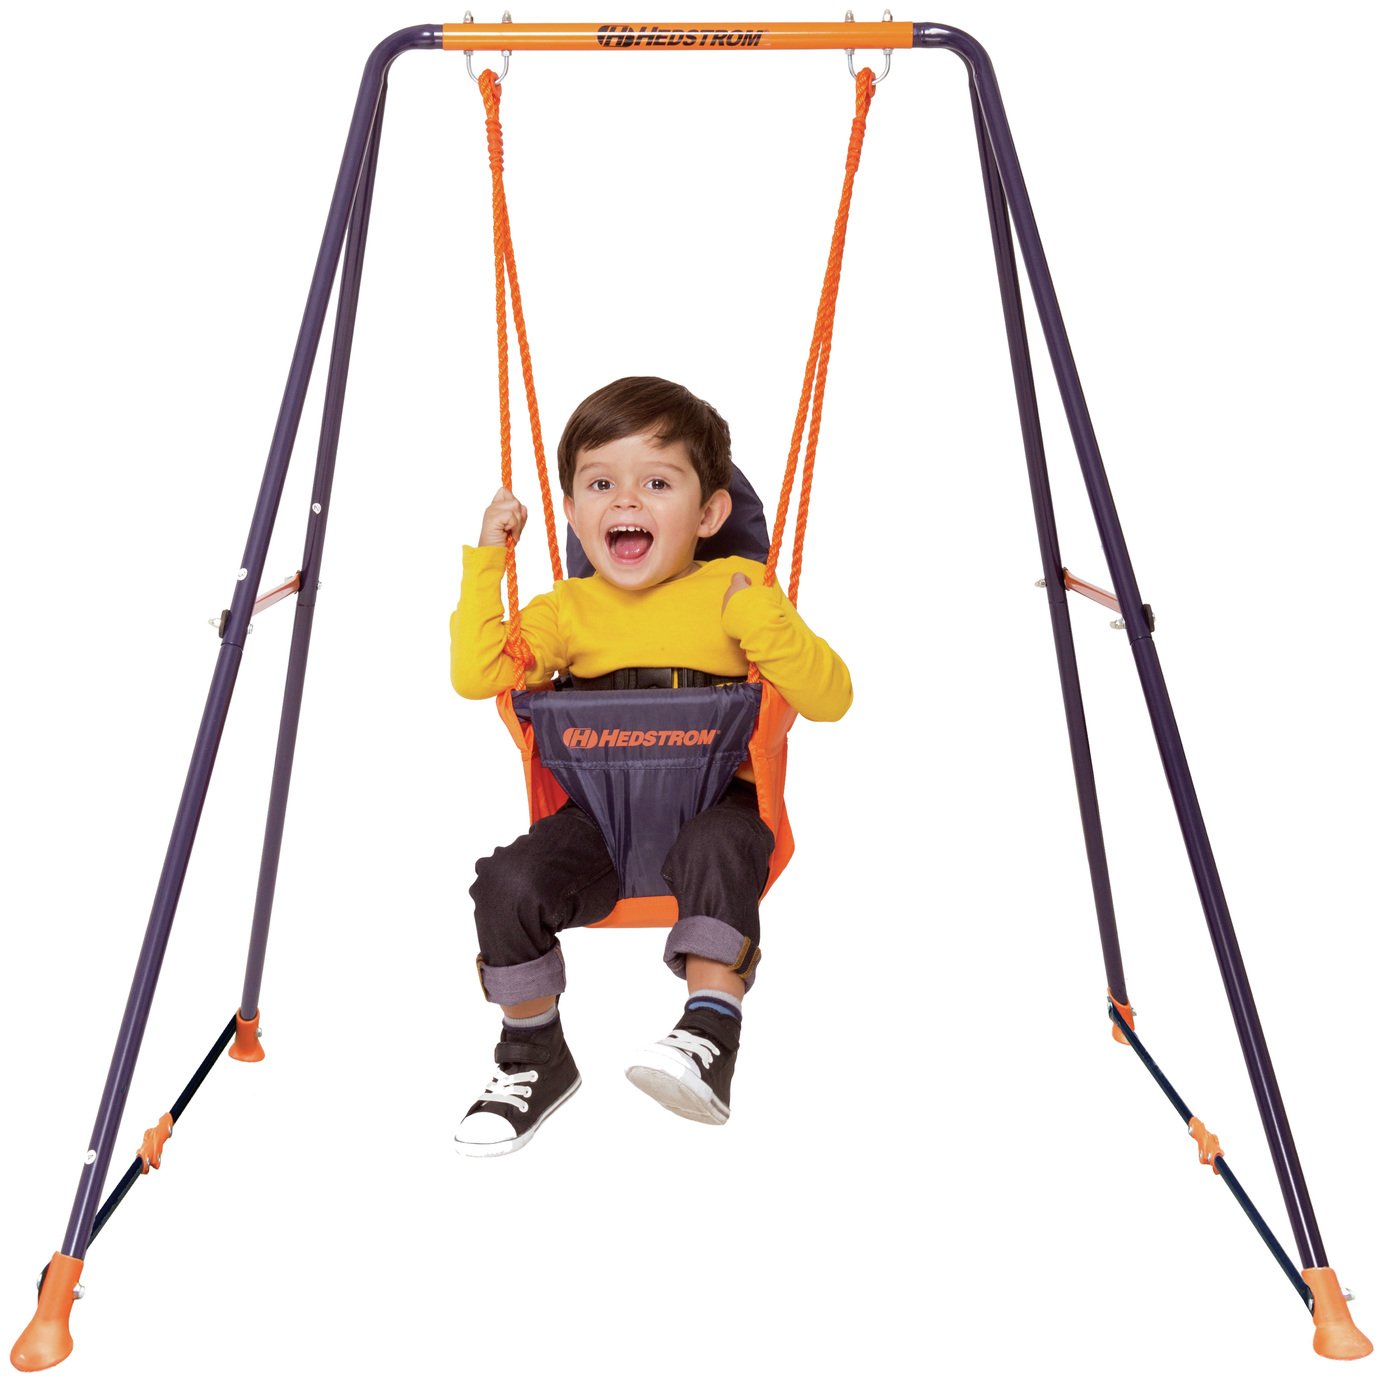 Hedstrom Fast Fold Toddler Swing Review